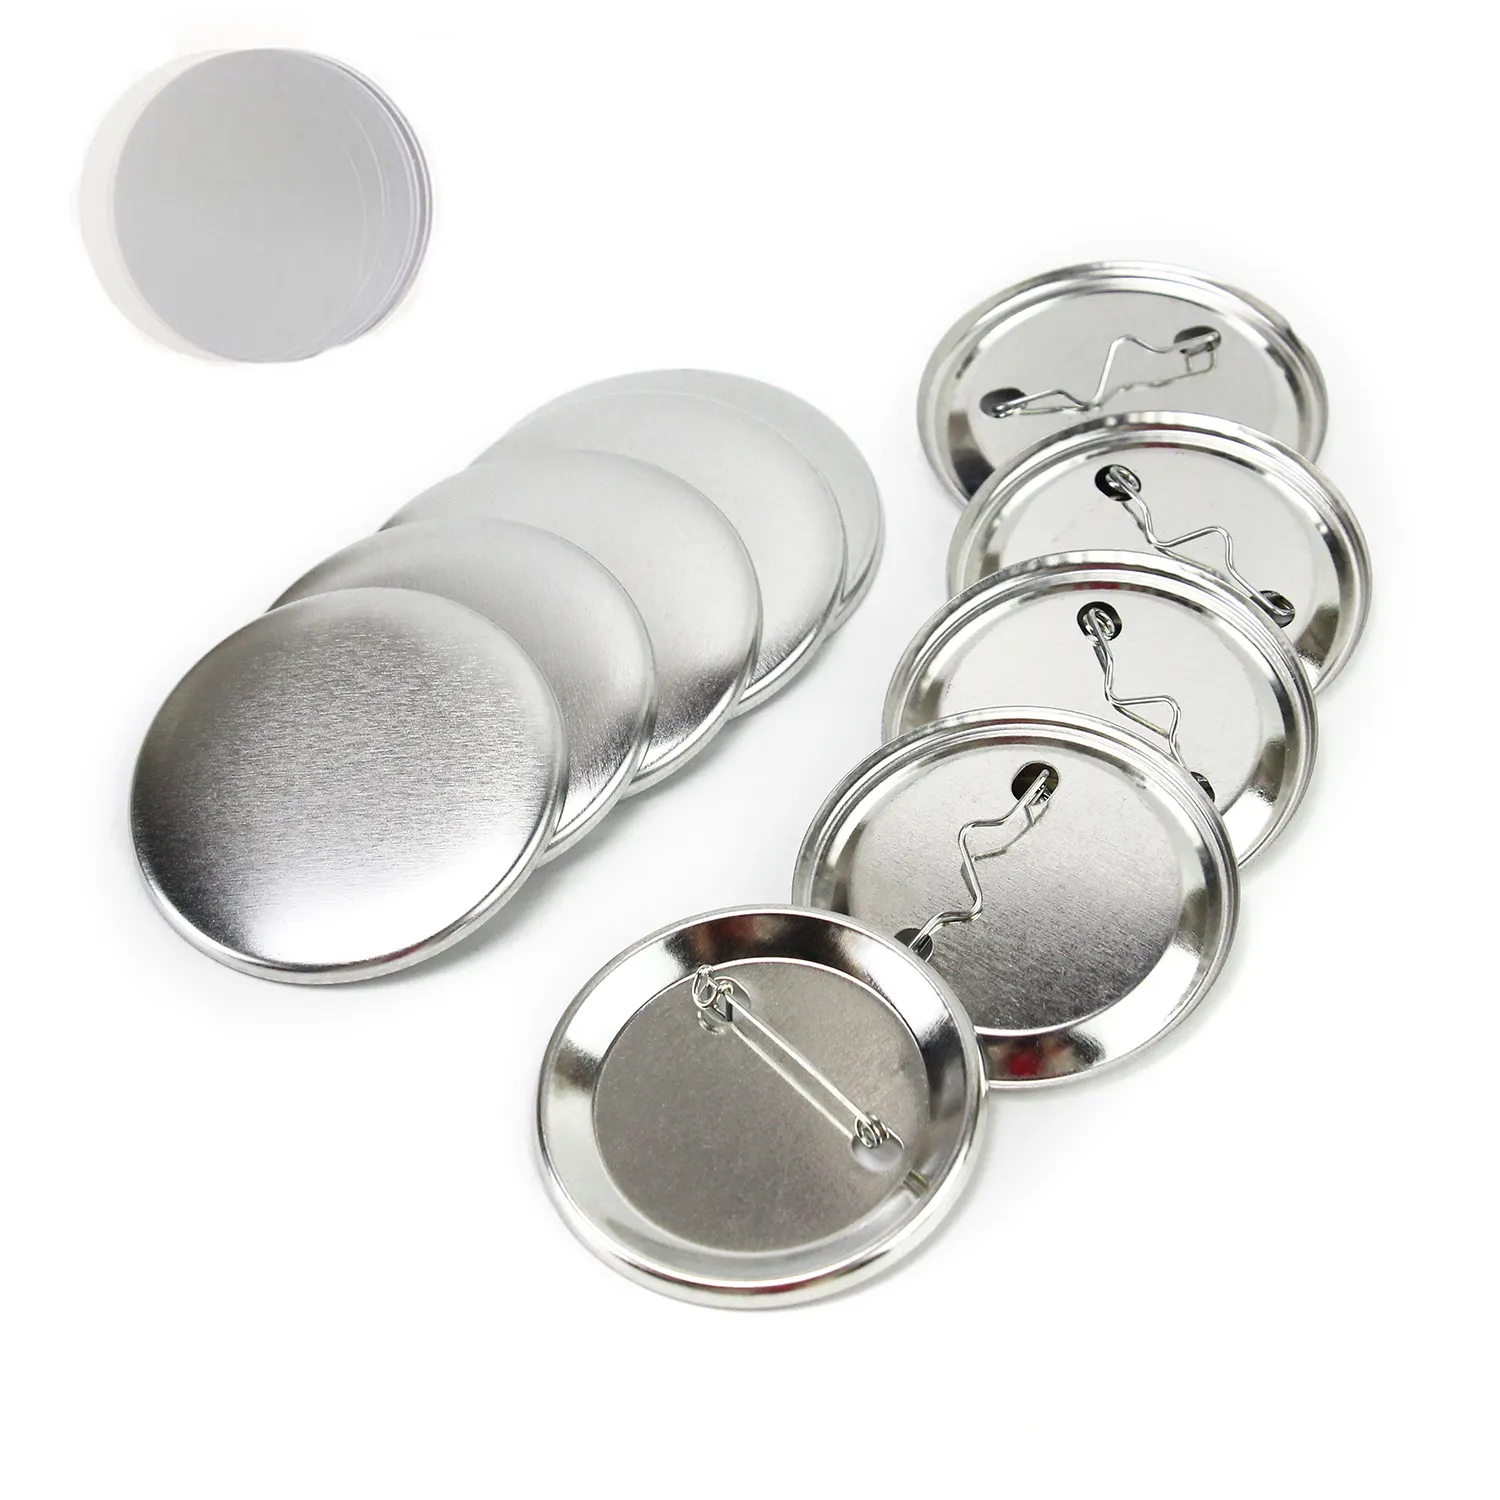 Supplier Wholesale Custom Tinplate 1'' 1.25'' 2.25'' 2.5'' Button Parts Raw Materials DIY Blank Sublimation Tin Button Badge